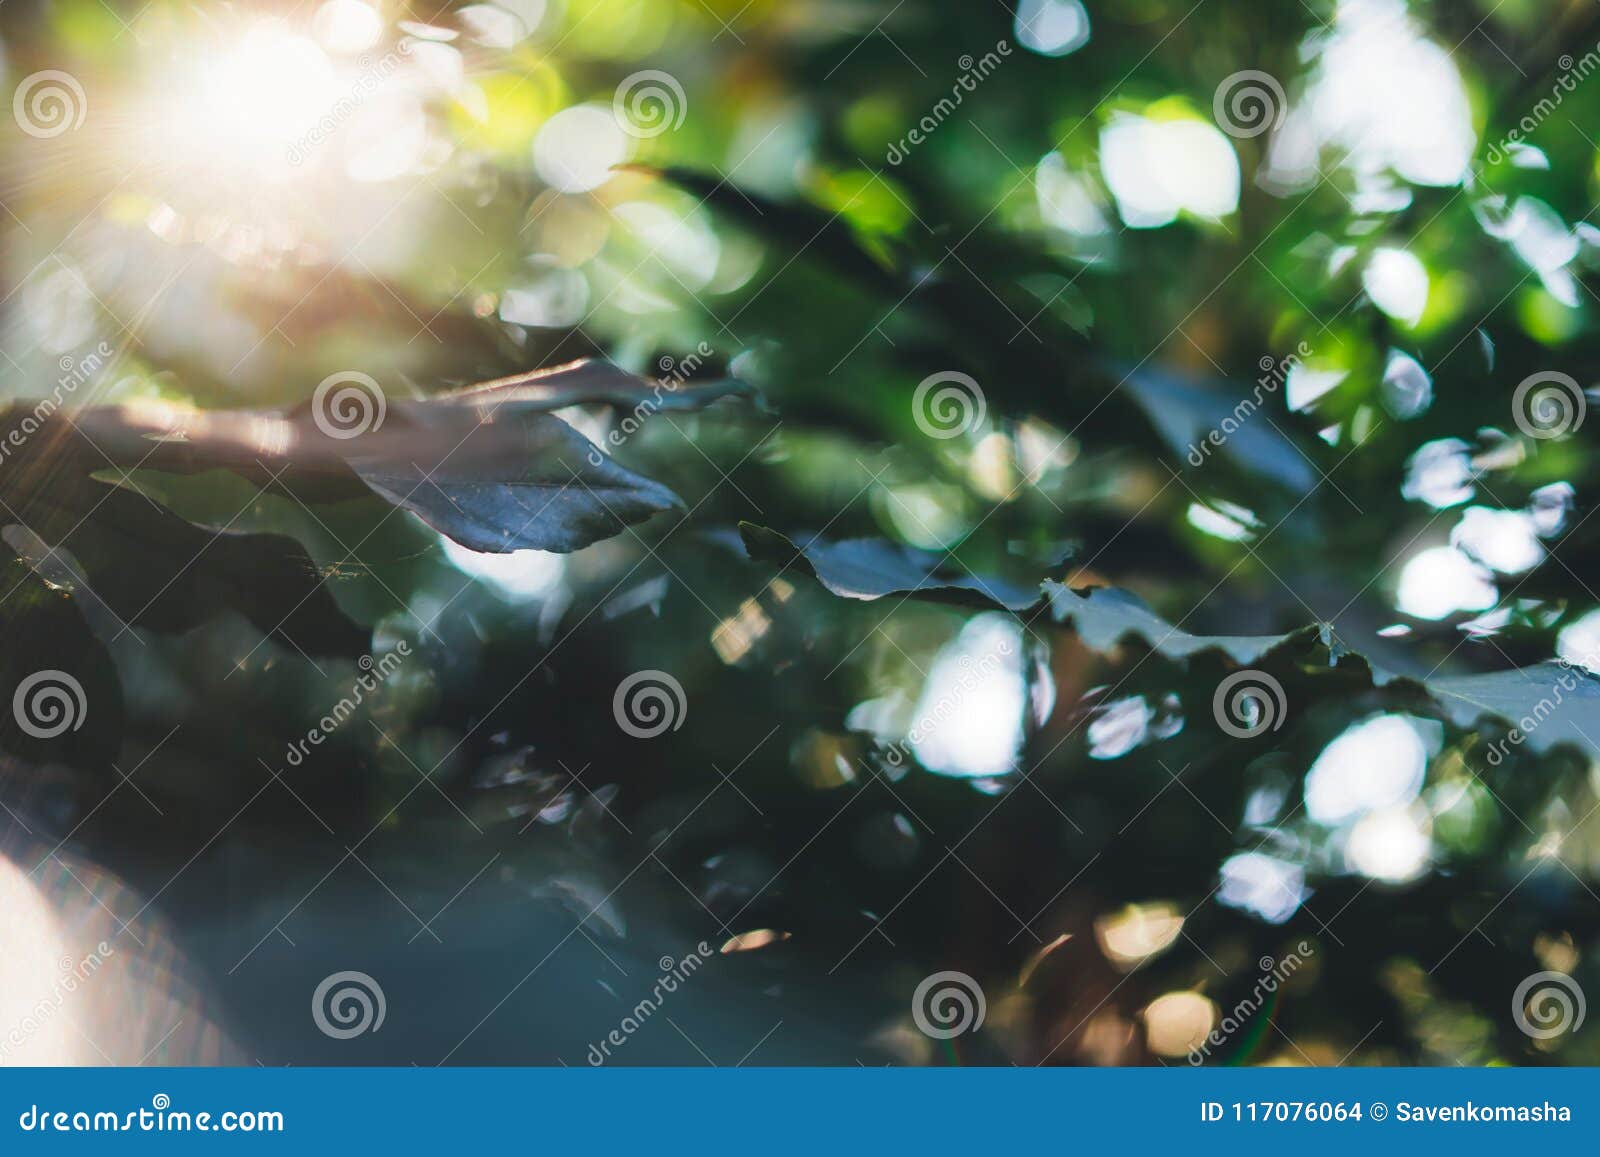 Fresh Healthy Bio Background Blur Natural with Abstract Blurred Foliage ...